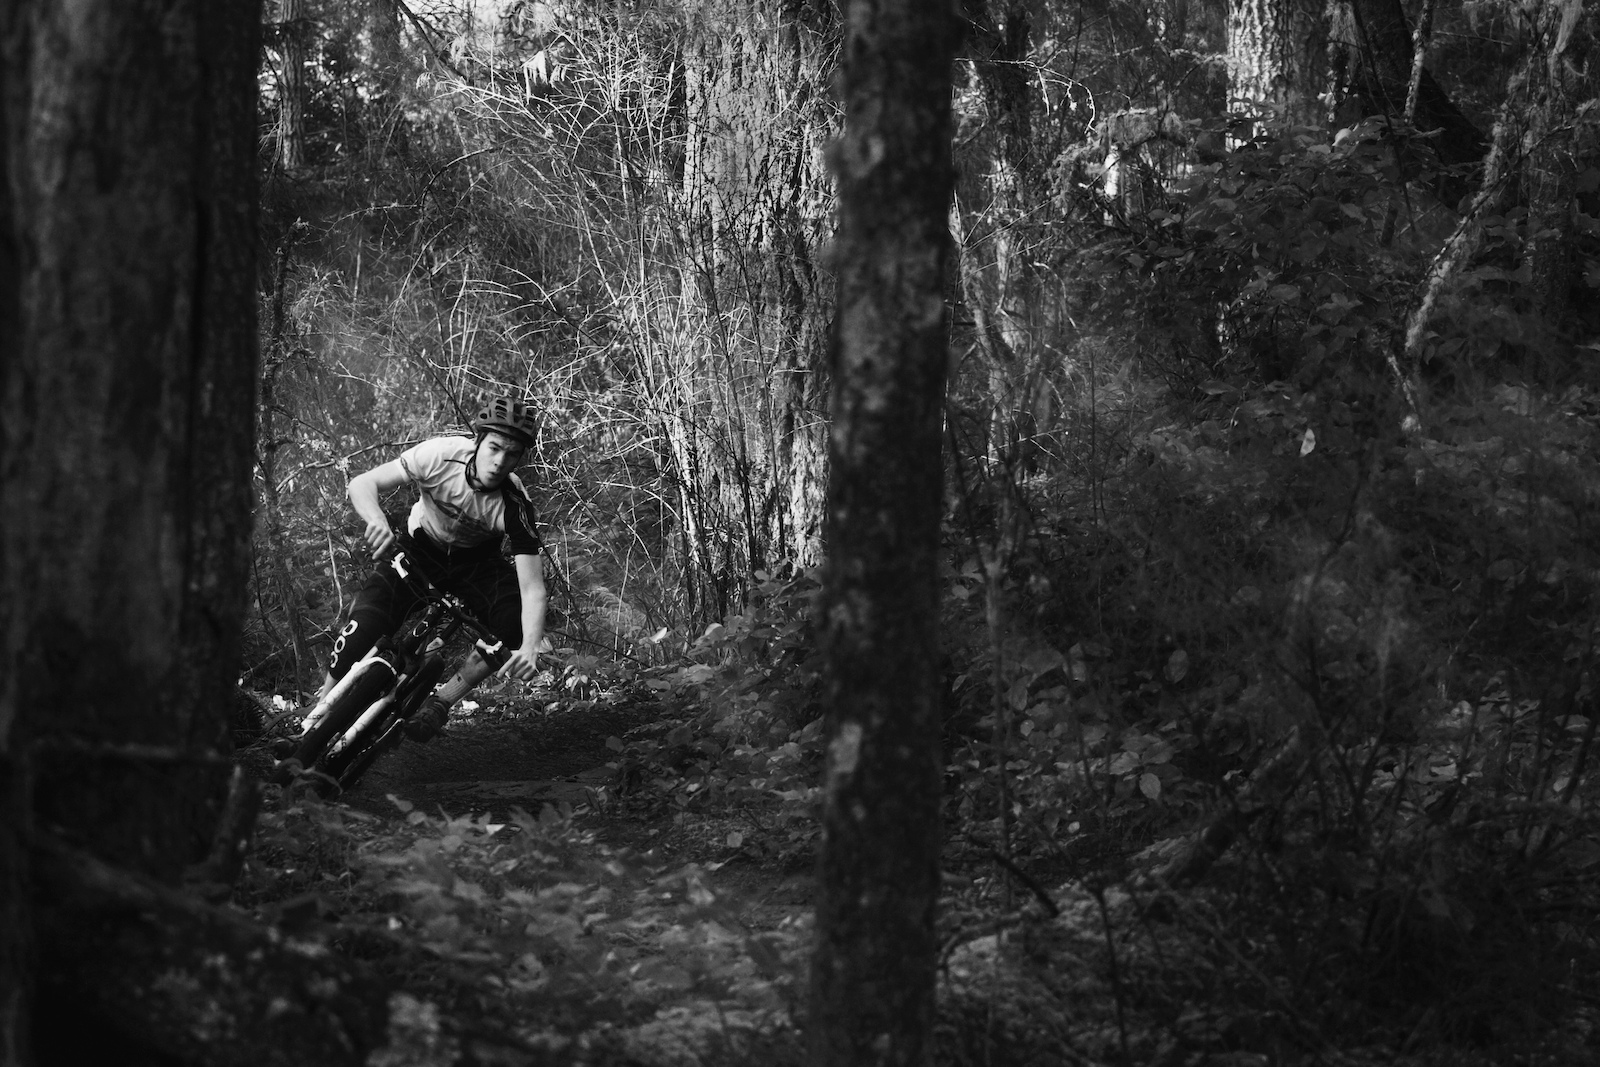 Pelle shreds a tight corner while filming with Scott Secco.